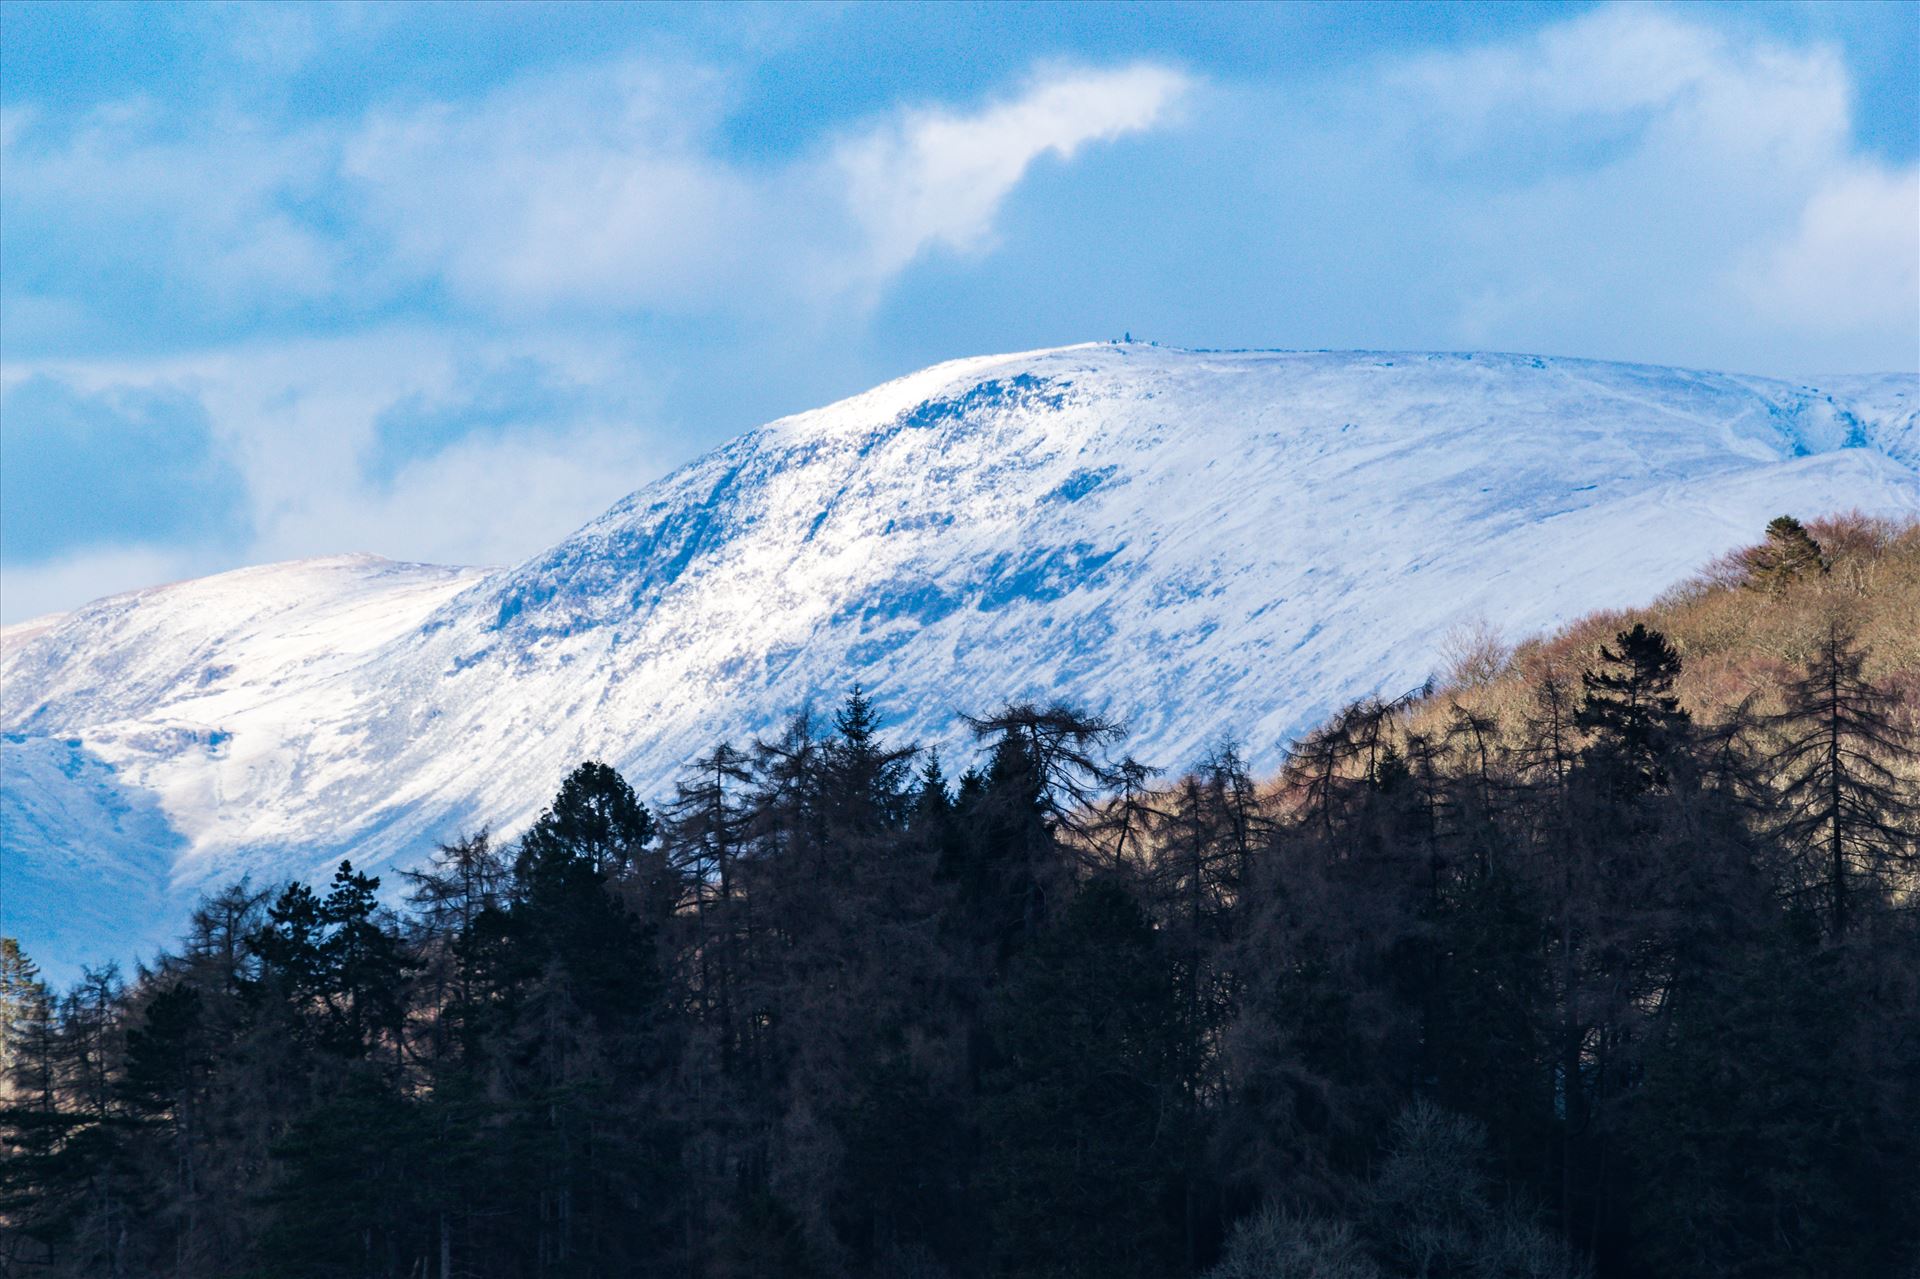 Lake Windermere Snowy Mountains - Taken from the south of the lake looking north, by AJ Stoves Photography